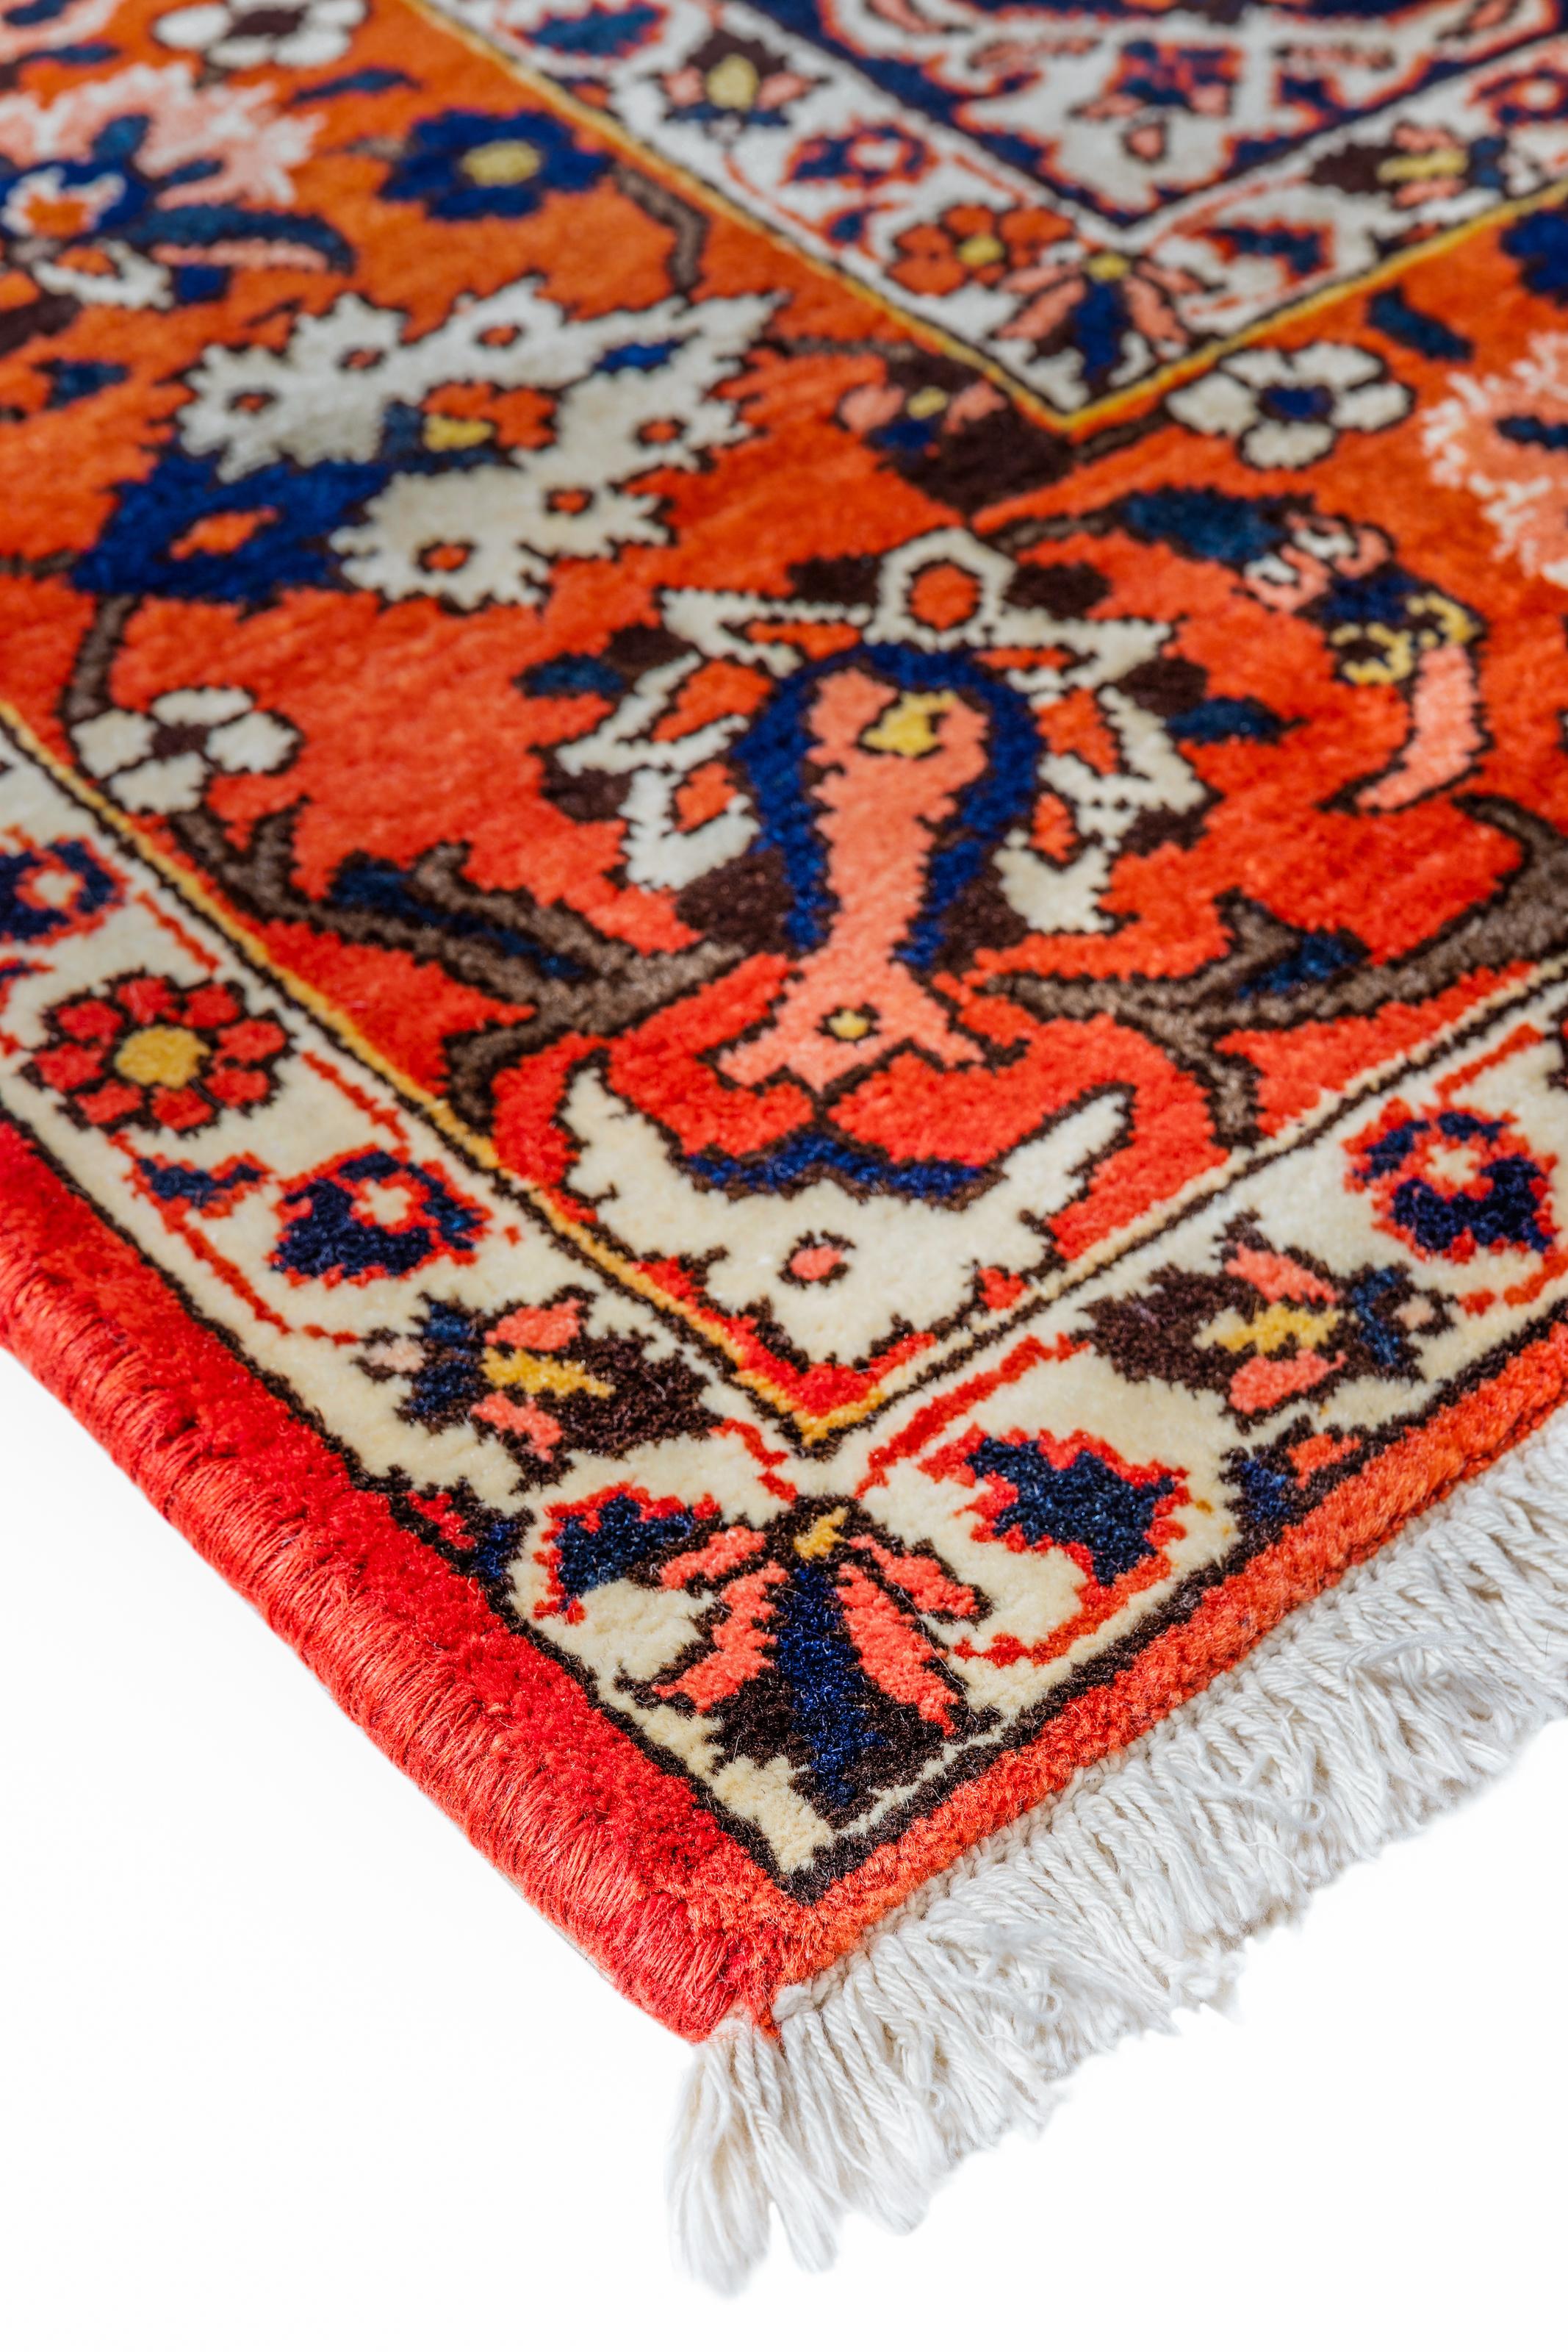 Renowned for their rich colors and interesting designs, Persian rugs are made with all natural wools and silk. Their beauty and the impact it will have on a home is endless.

Exact Dimensions- 10' 0